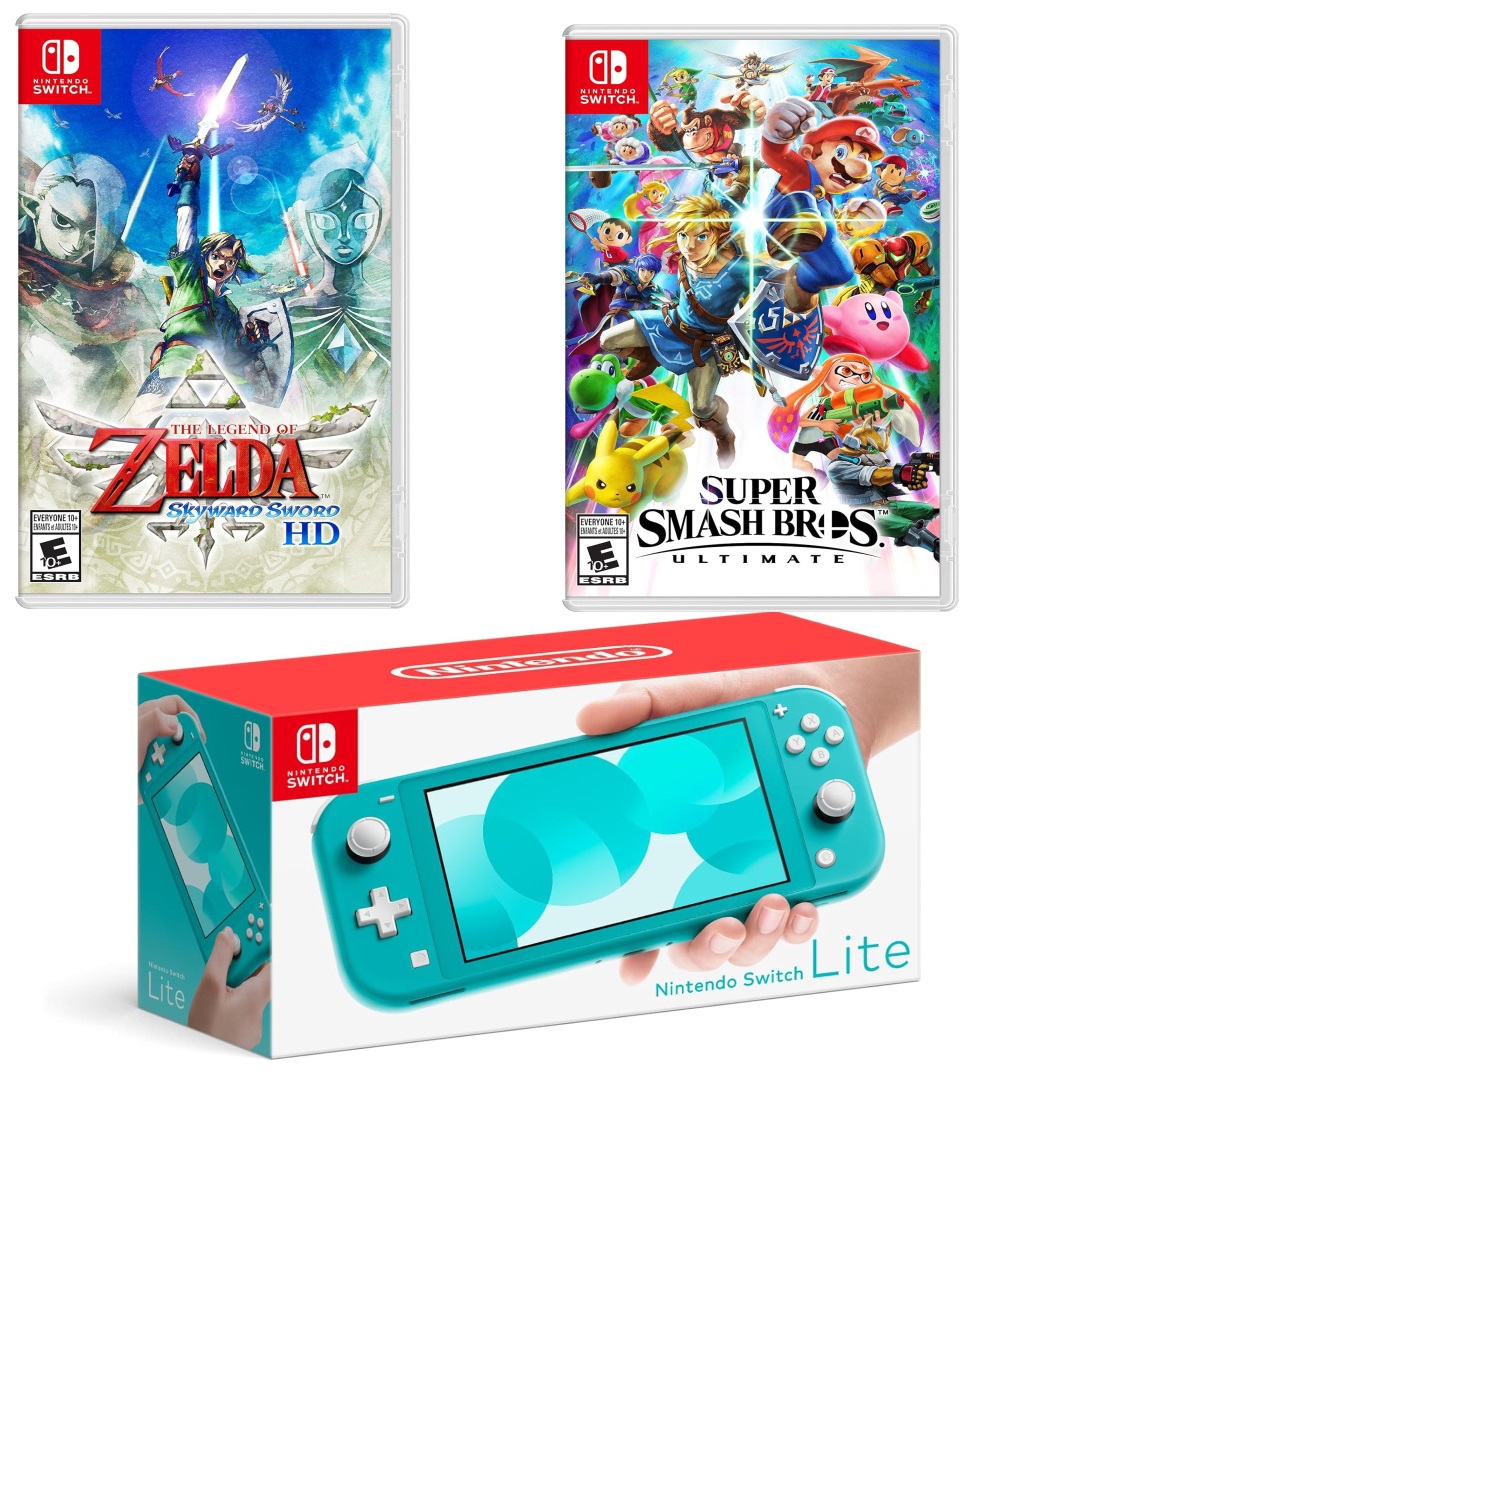 Nintendo Switch Lite Console - Turquoise bundled with Super Smash Bros. Ultimate - Nintendo Switch Game & The Legend of Zelda: Skyward Sword HD - Nintendo Switch Game